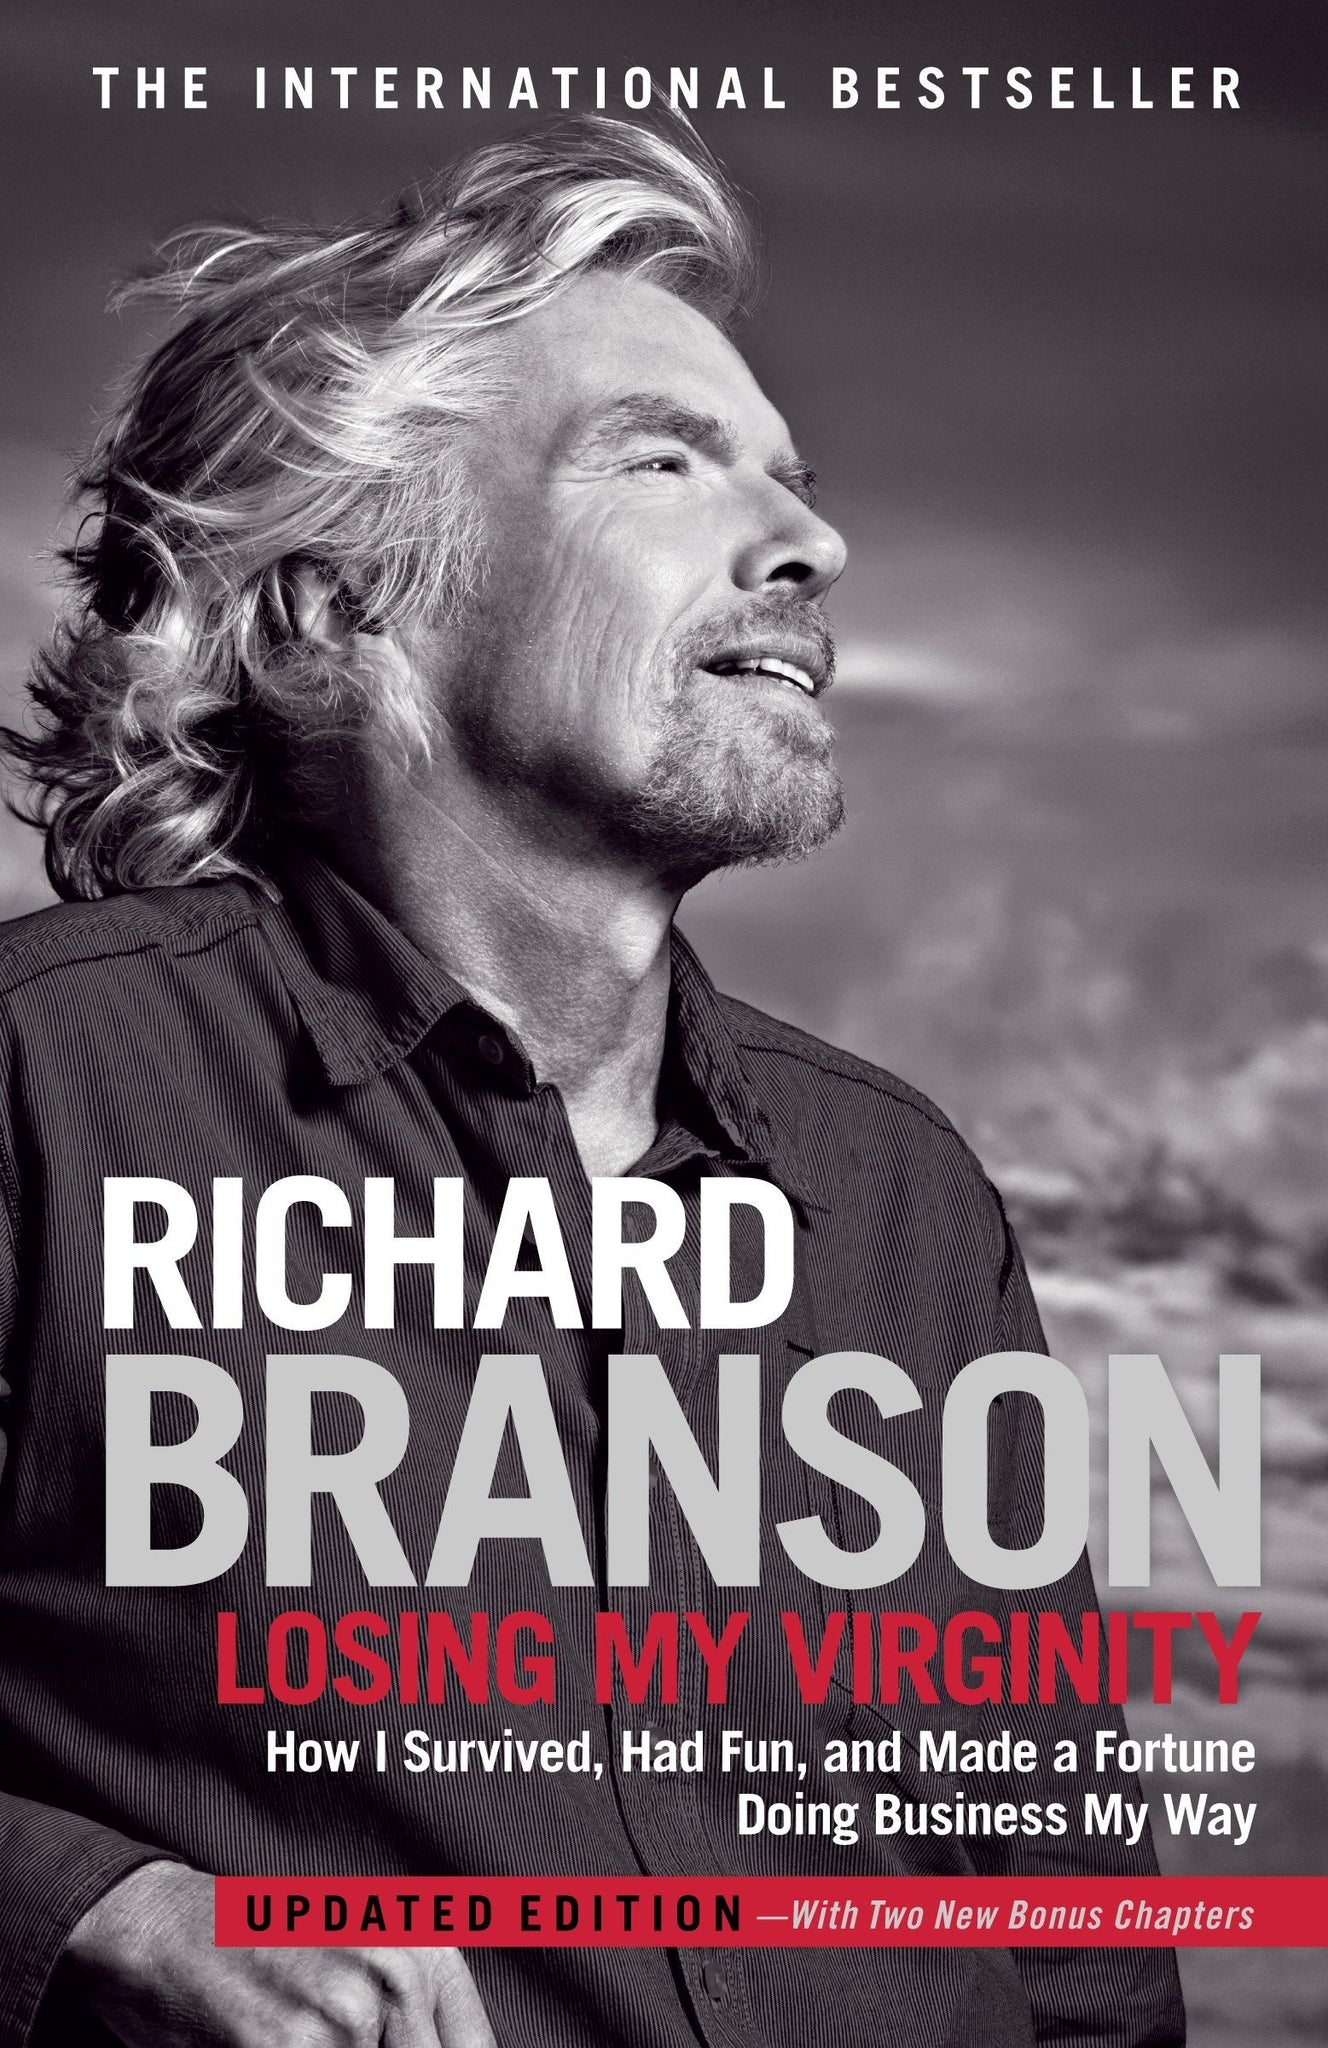 Losing My Virginity: How I've Survived, Had Fun, and Made a Fortune Doing Business My Way by Richard Branson